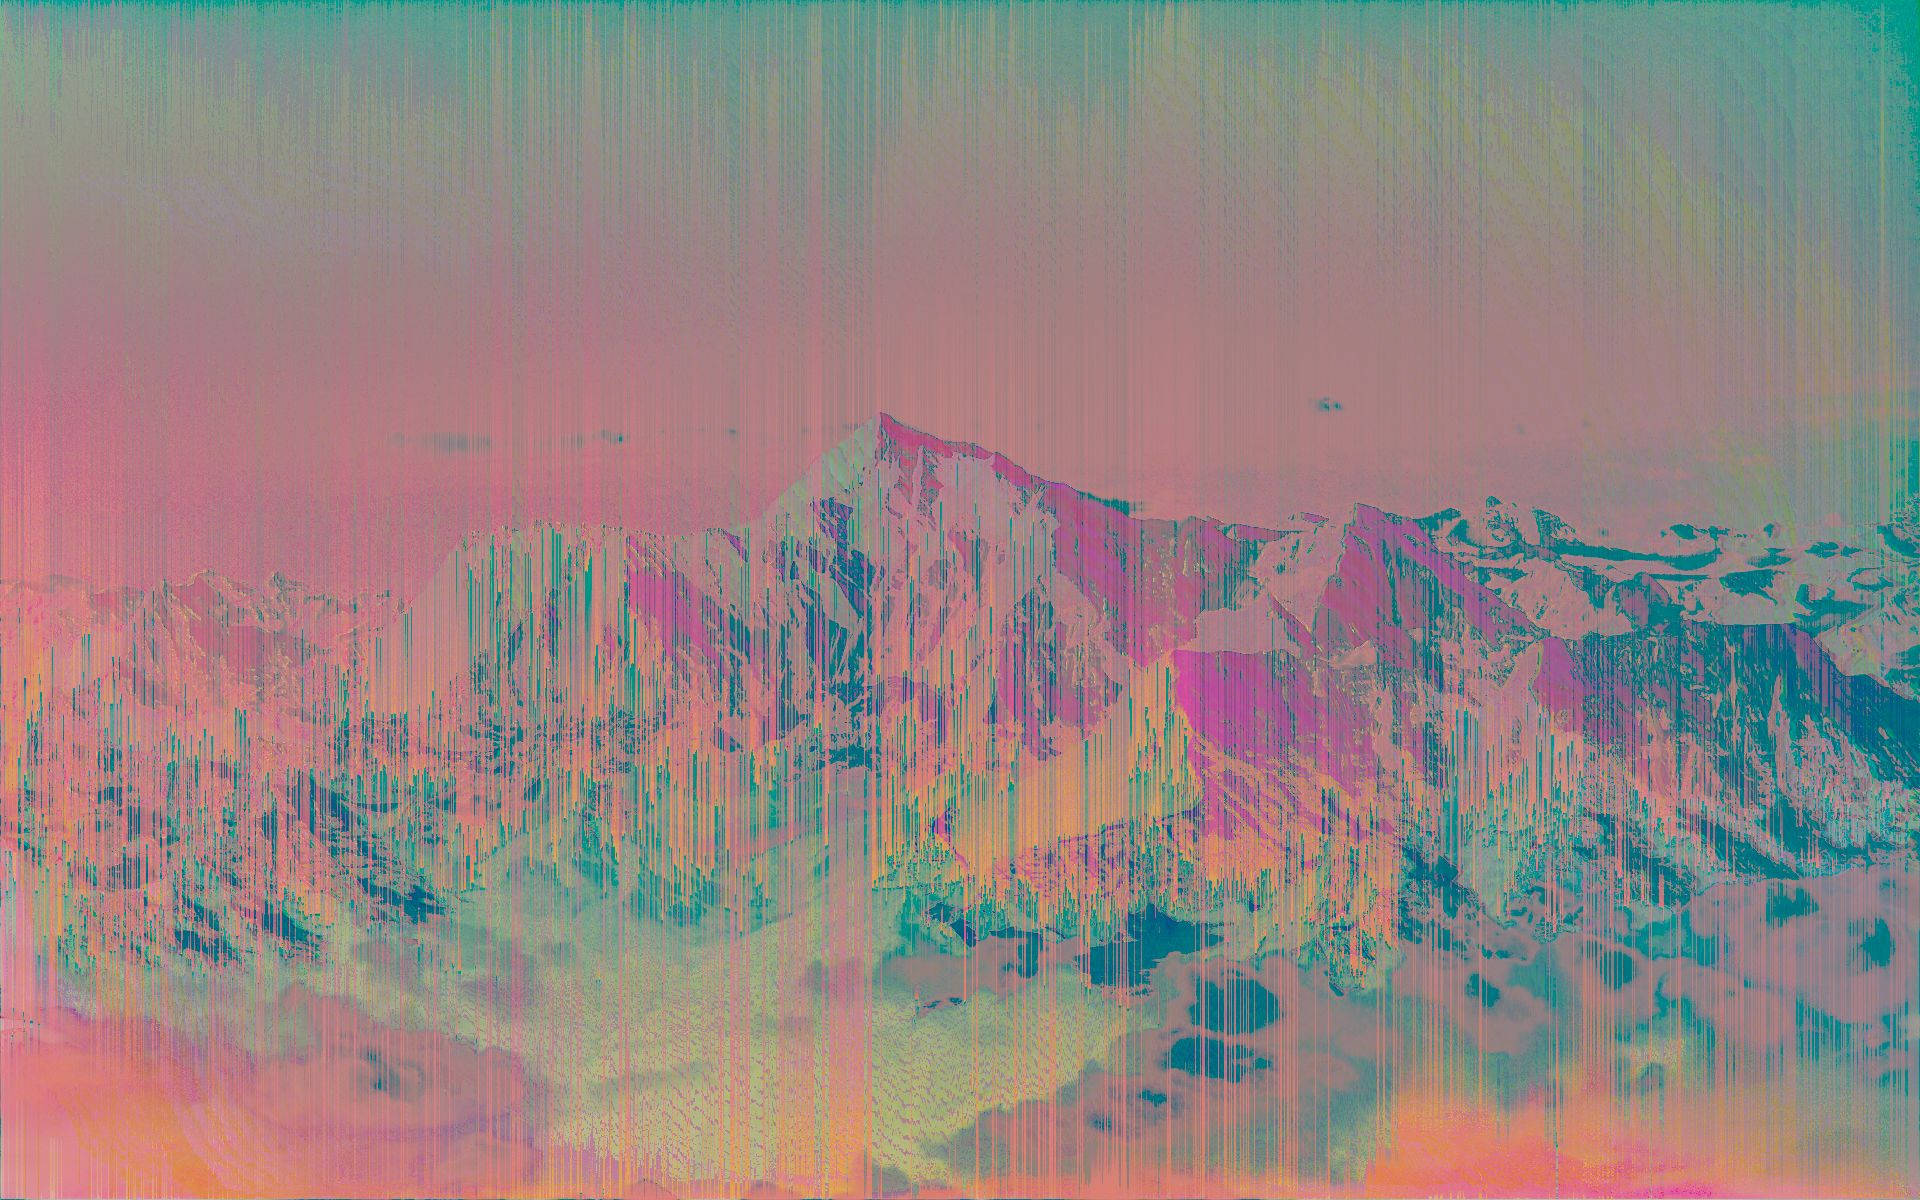 “A Glitchy take on a peaceful picture” Wallpaper